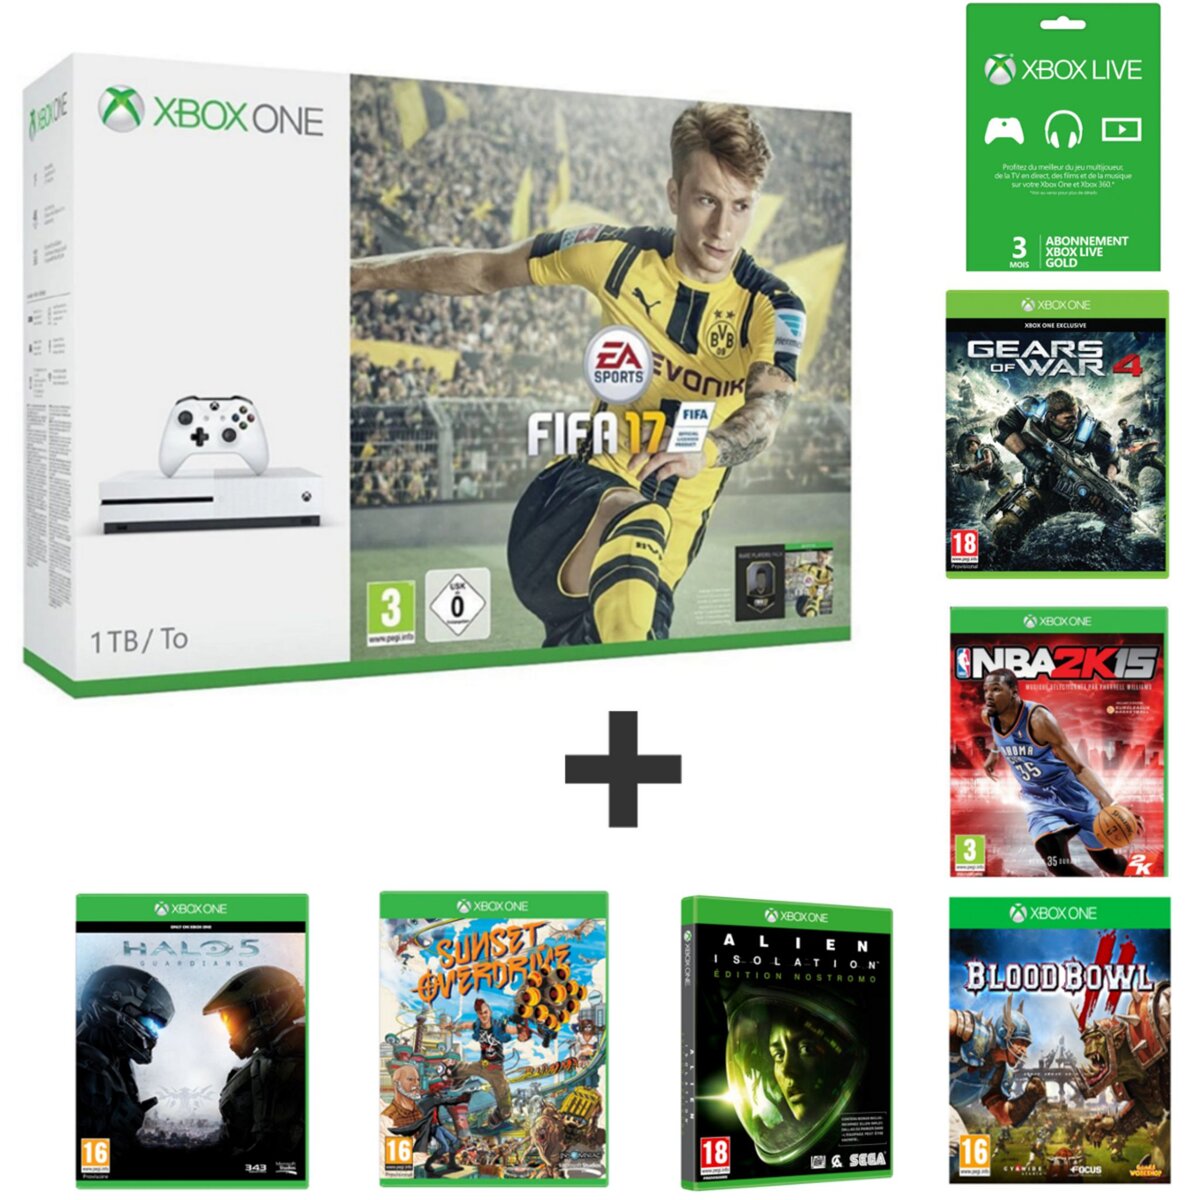 Console Xbox One S 1To FIFA 17 + 3 mois Xbox live + Gears Of War 4 + Halo 5 + Sunset Overdrive + Blood Bowl 2 + NBA 2K15 + Alien Isolation - limited edition